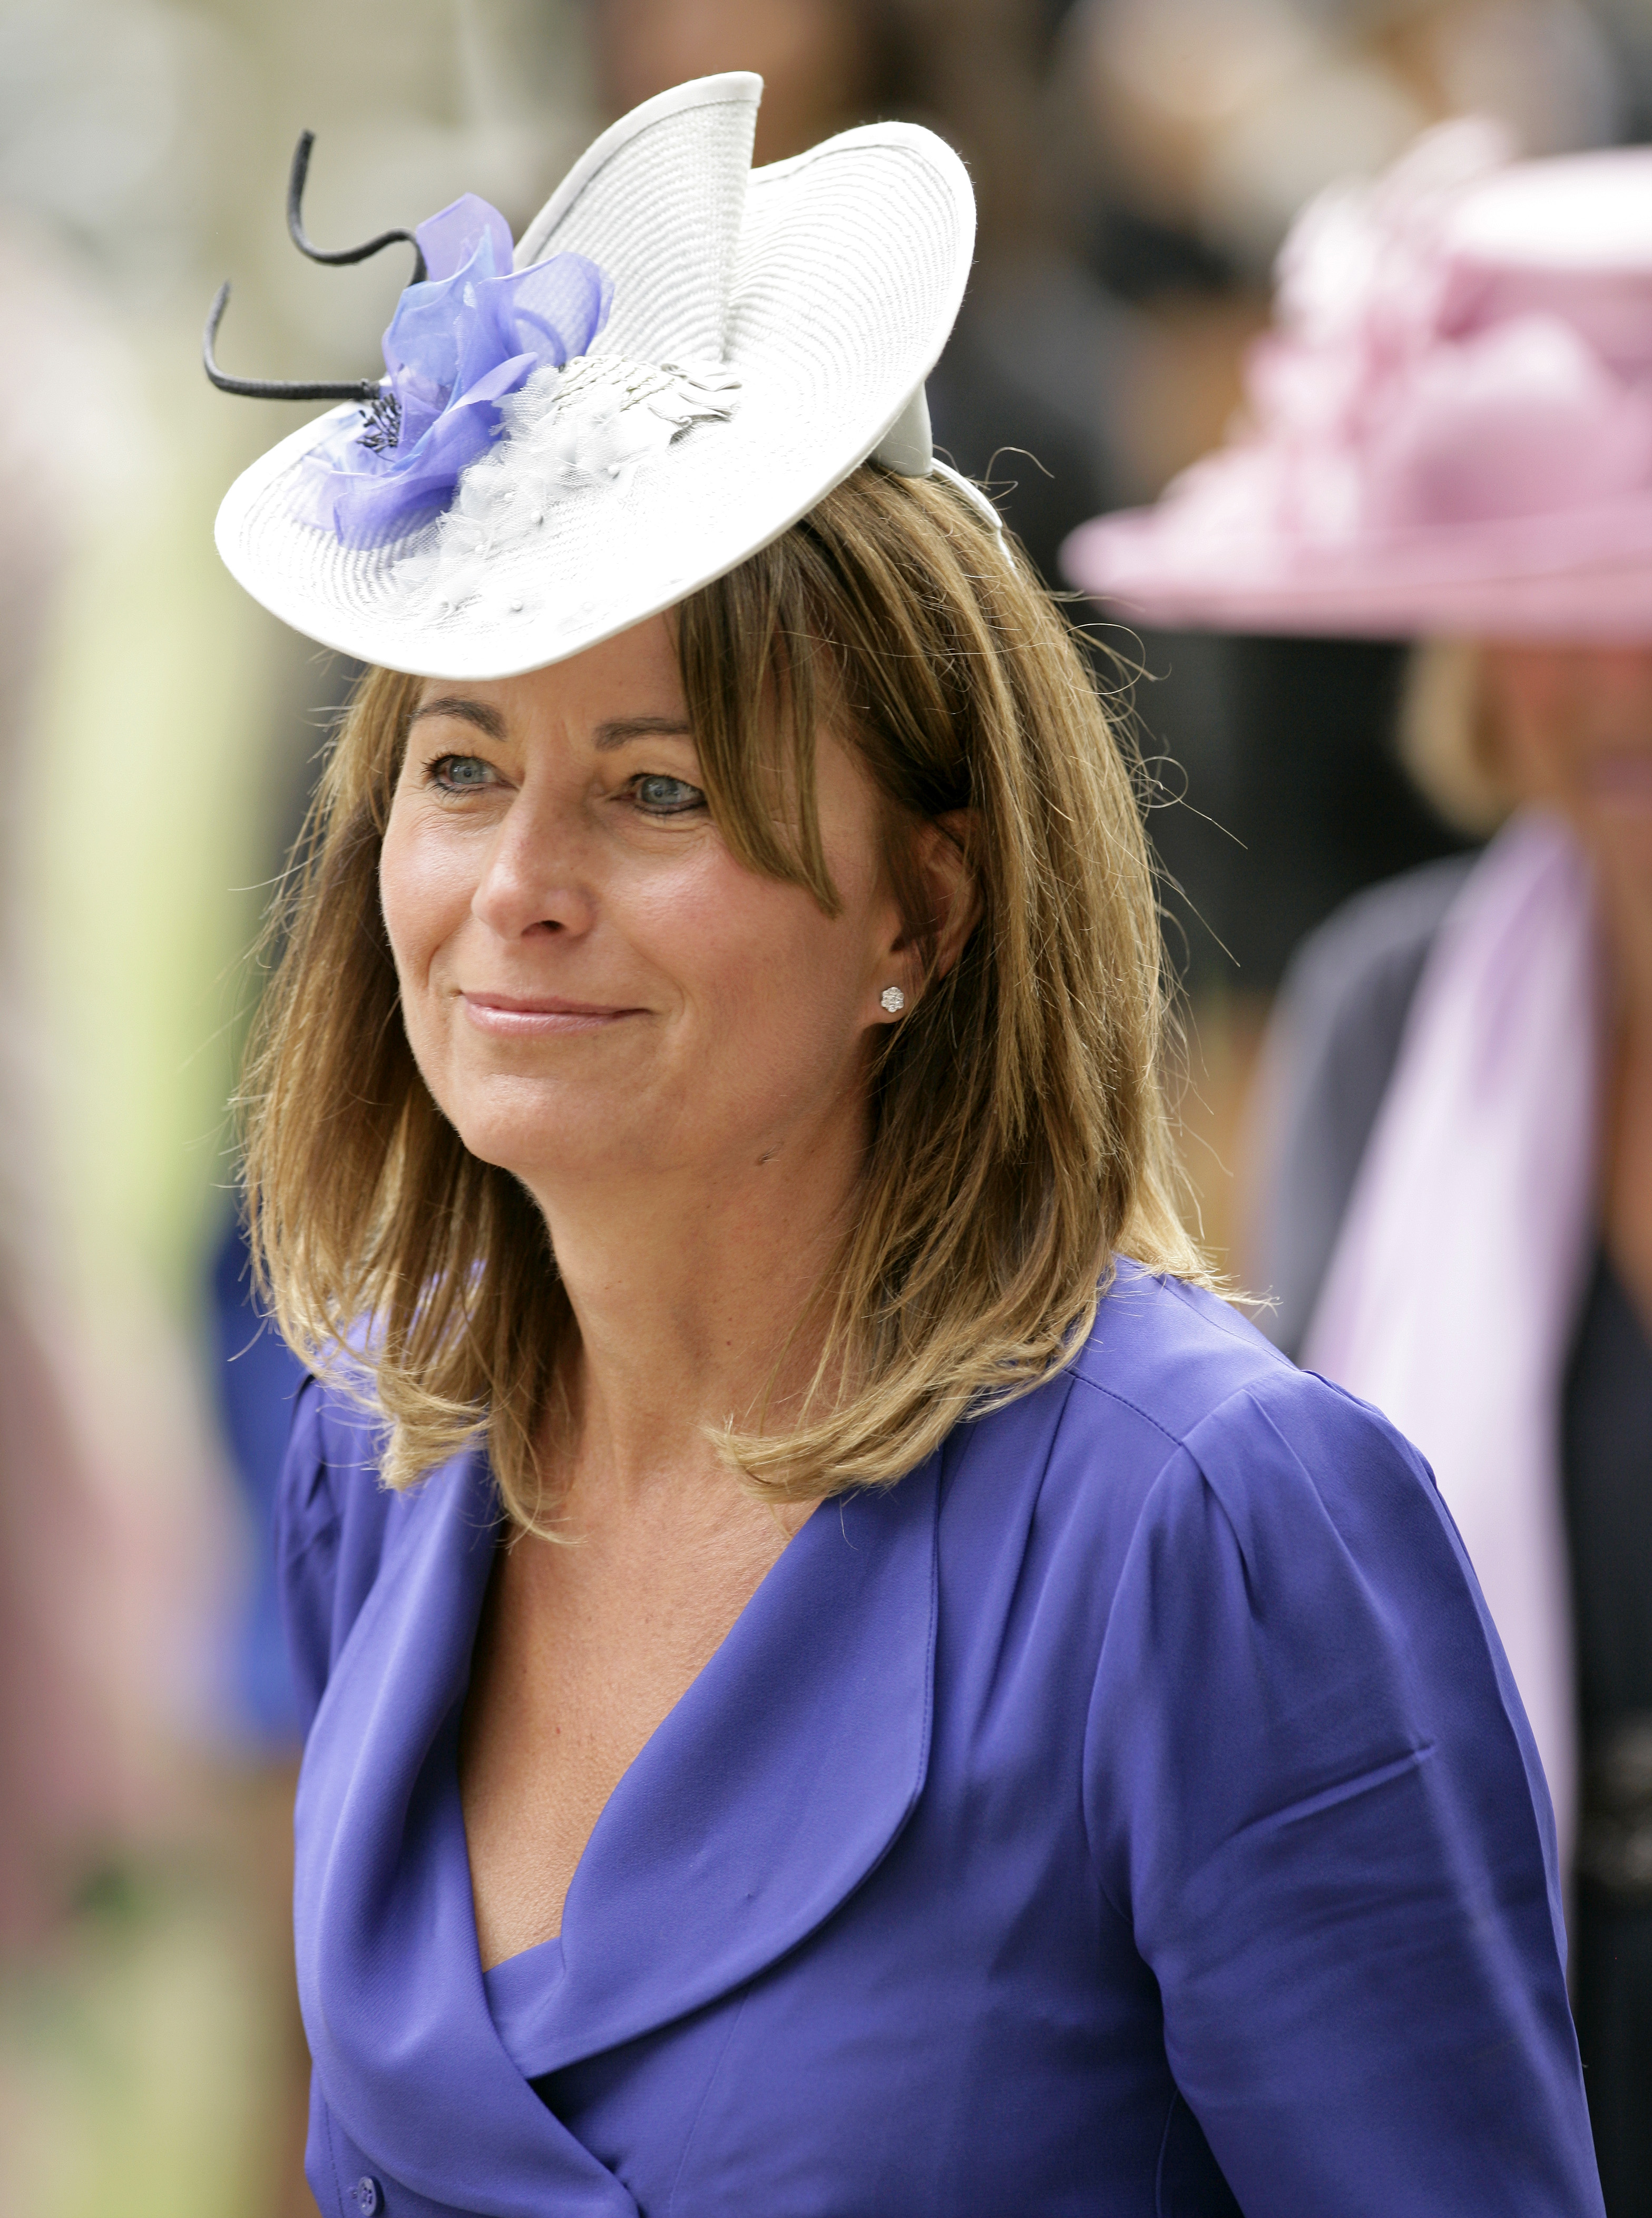 Carole Middleton attends day 5 of Royal Ascot at Ascot Racecourse in England, on June 19, 2010. | Source: Getty Images